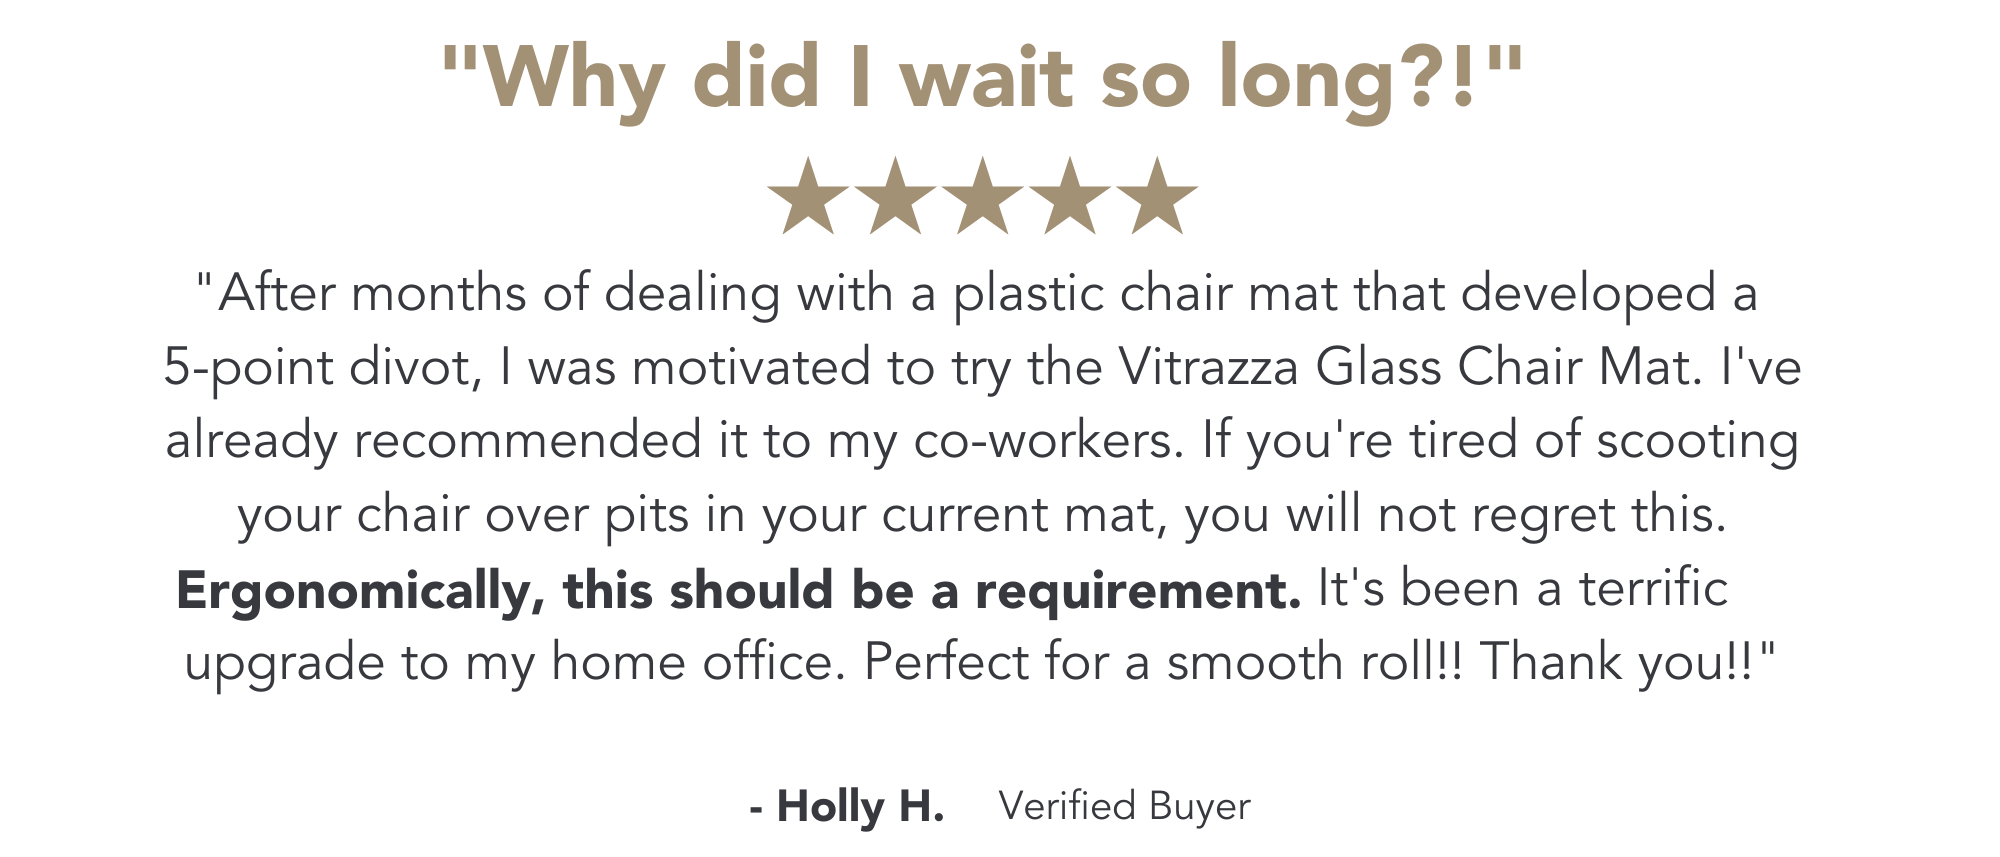 Image of a review that reads: "After months of dealing with a plastic chair mat that developed a 5-point divot, I was motivated to try the Vitrazza Glass Chair Mat. I've already recommended it to my co-workers. If you're tired of scooting your chair over pits in your current mat, you will not regret this. Ergonomically, this should be a requirement. It's been a terrific upgrade to my home office. Perfect for a smooth roll!! Thank you!!"